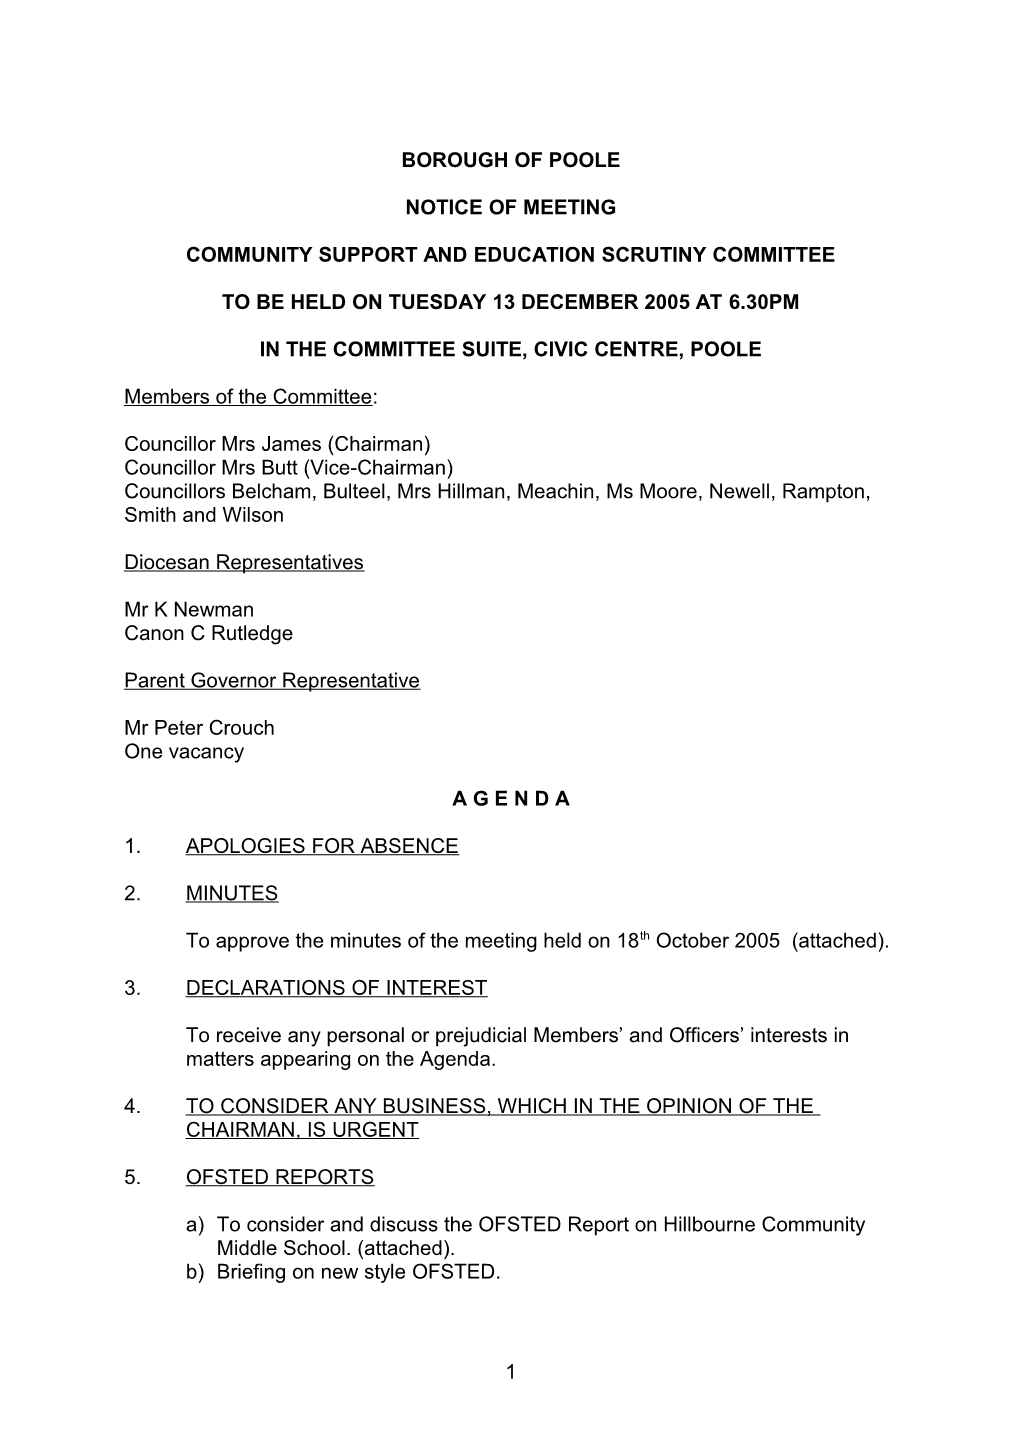 Agenda - Community Support and Education Scrutiny Committee - 13 December 2005